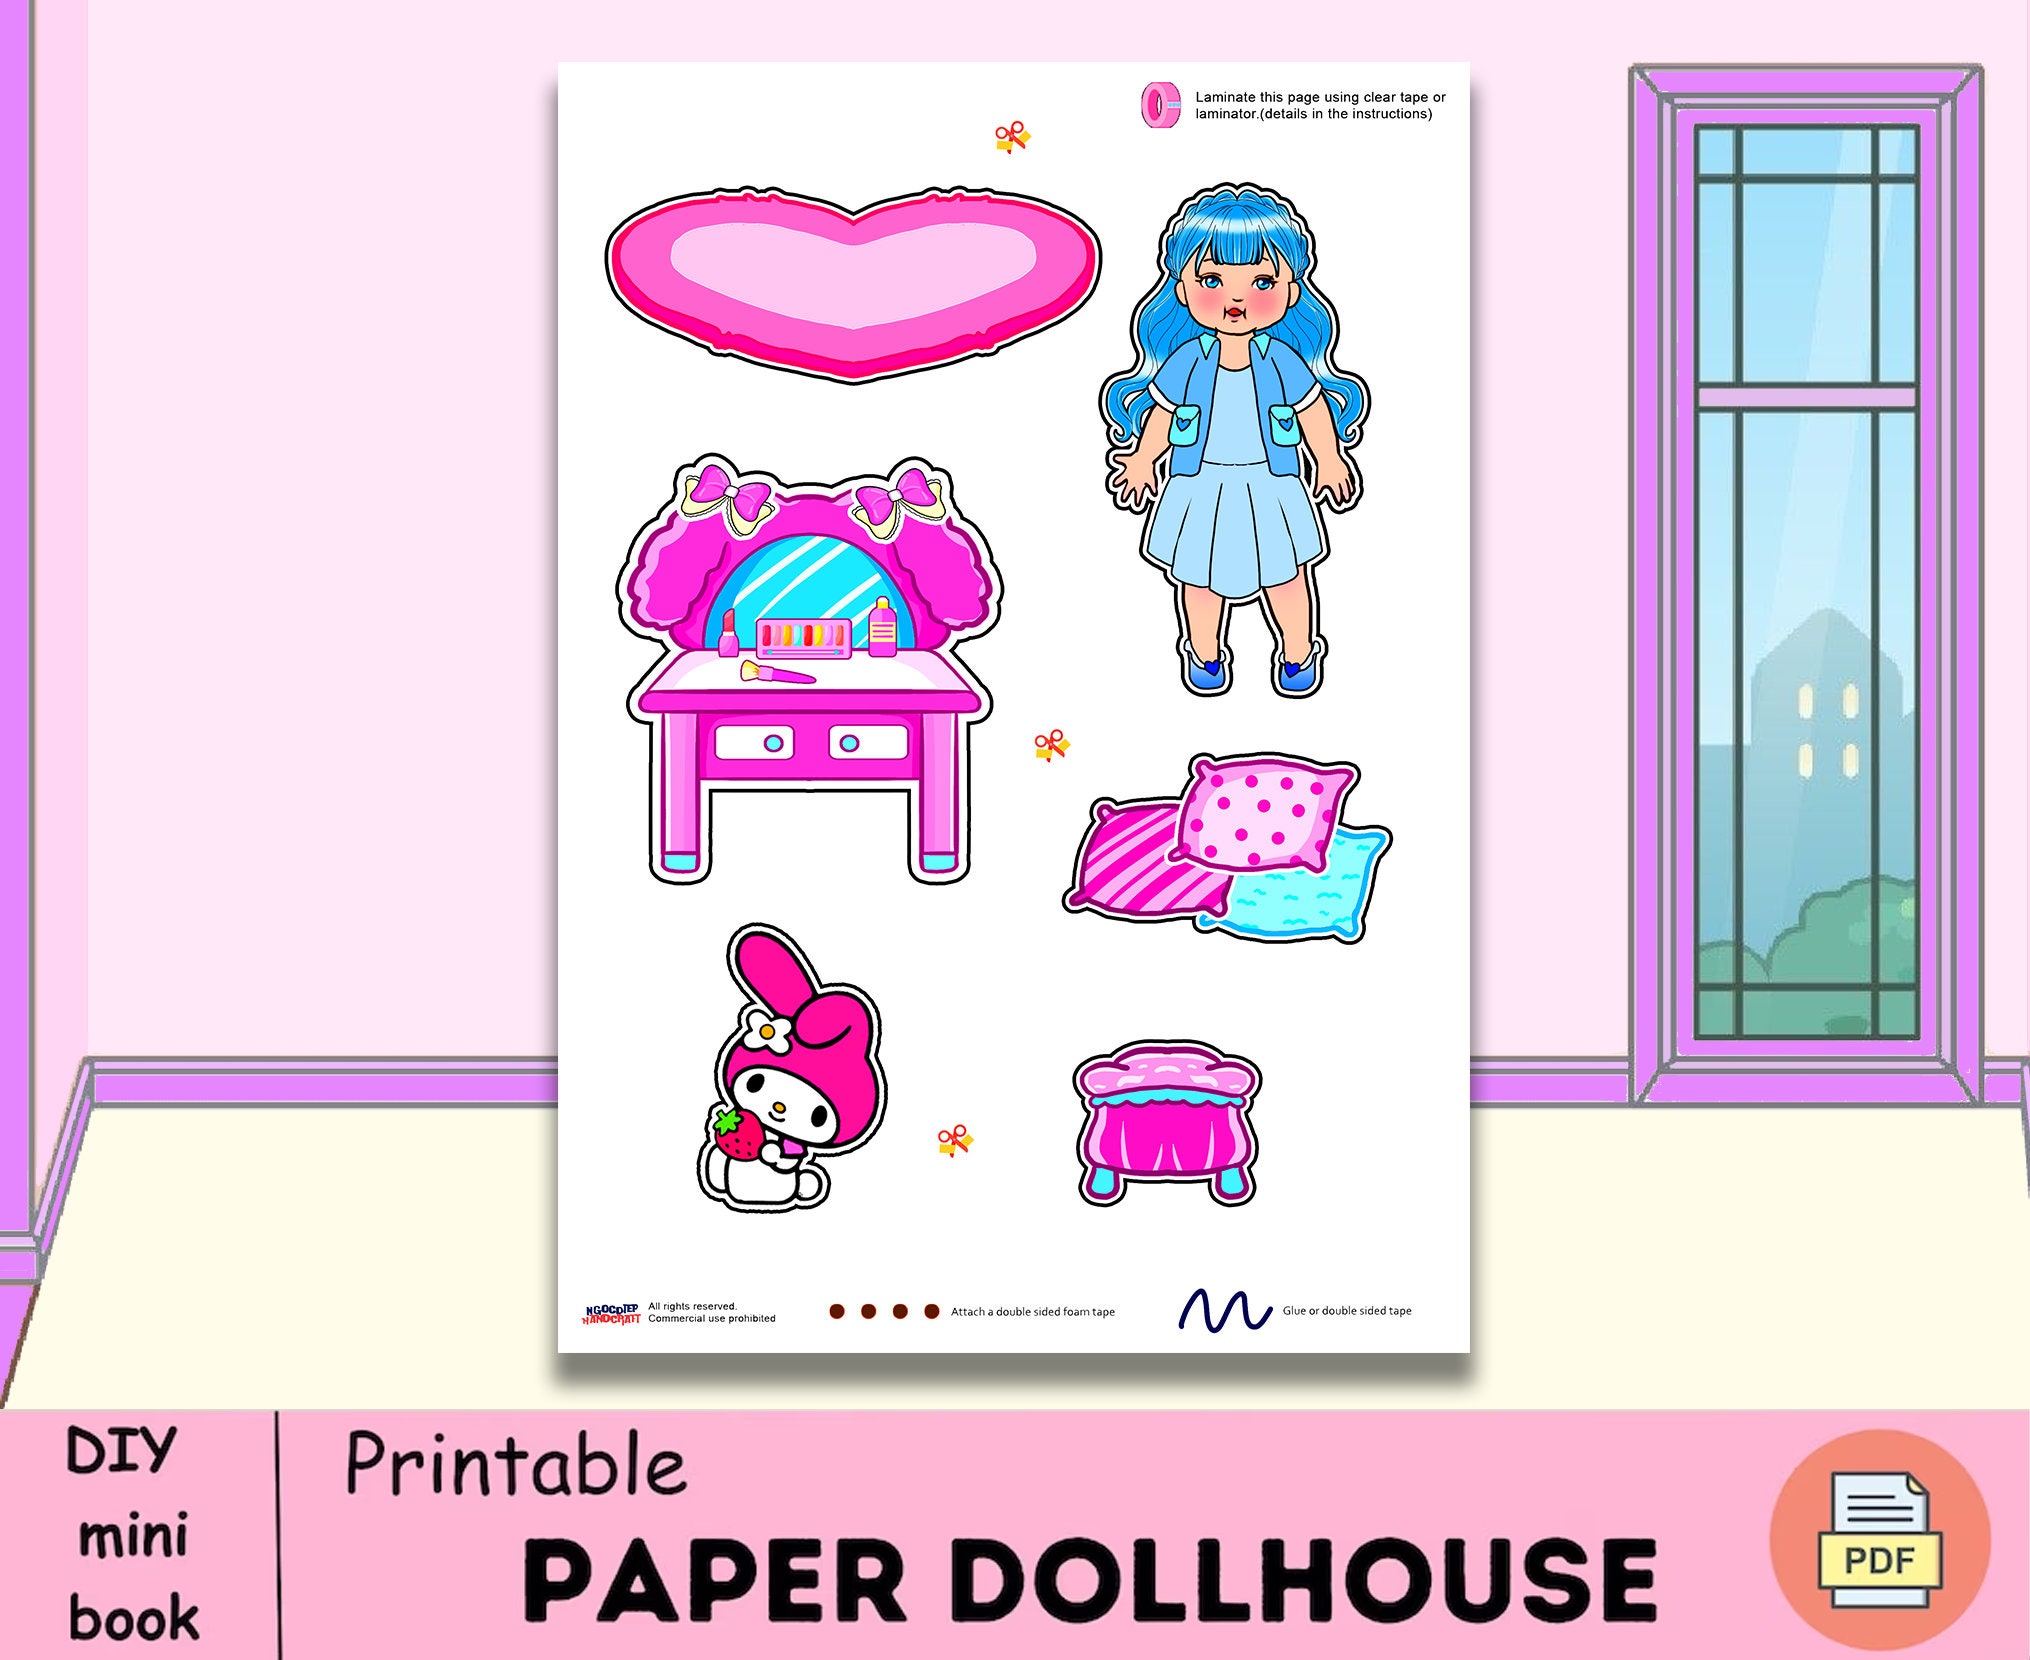 Pink and purple toca boca paper house for baby 🌸 Toca boca pre